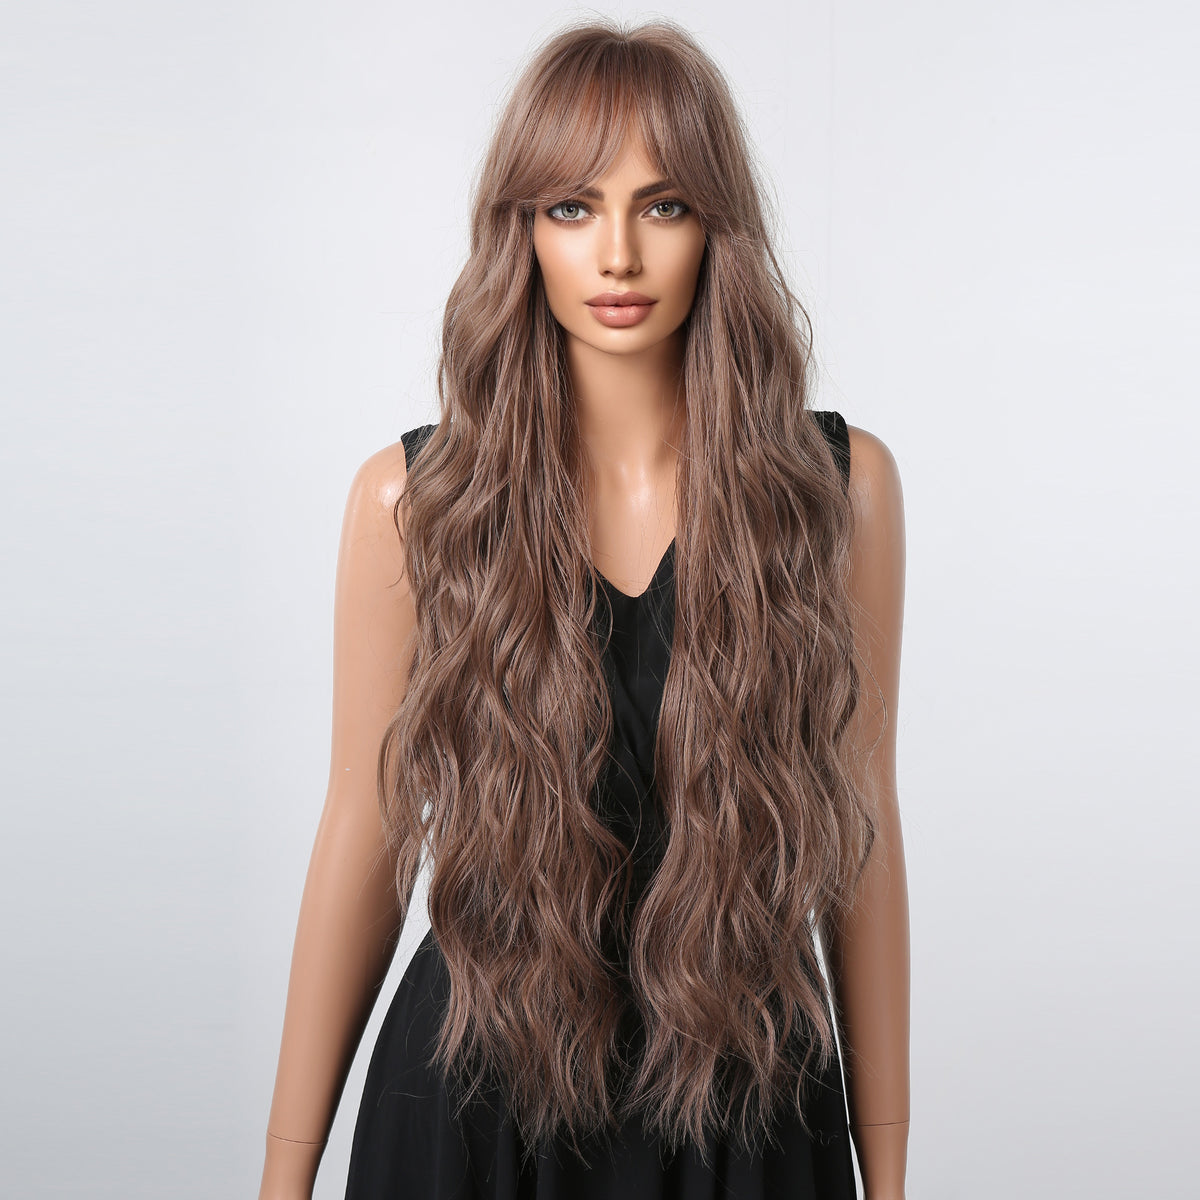 32 Inch Long Curly Brown Wigs with Bangs Synthetic Wigs for Women Daily Use Party or Cosplay LC1061-1